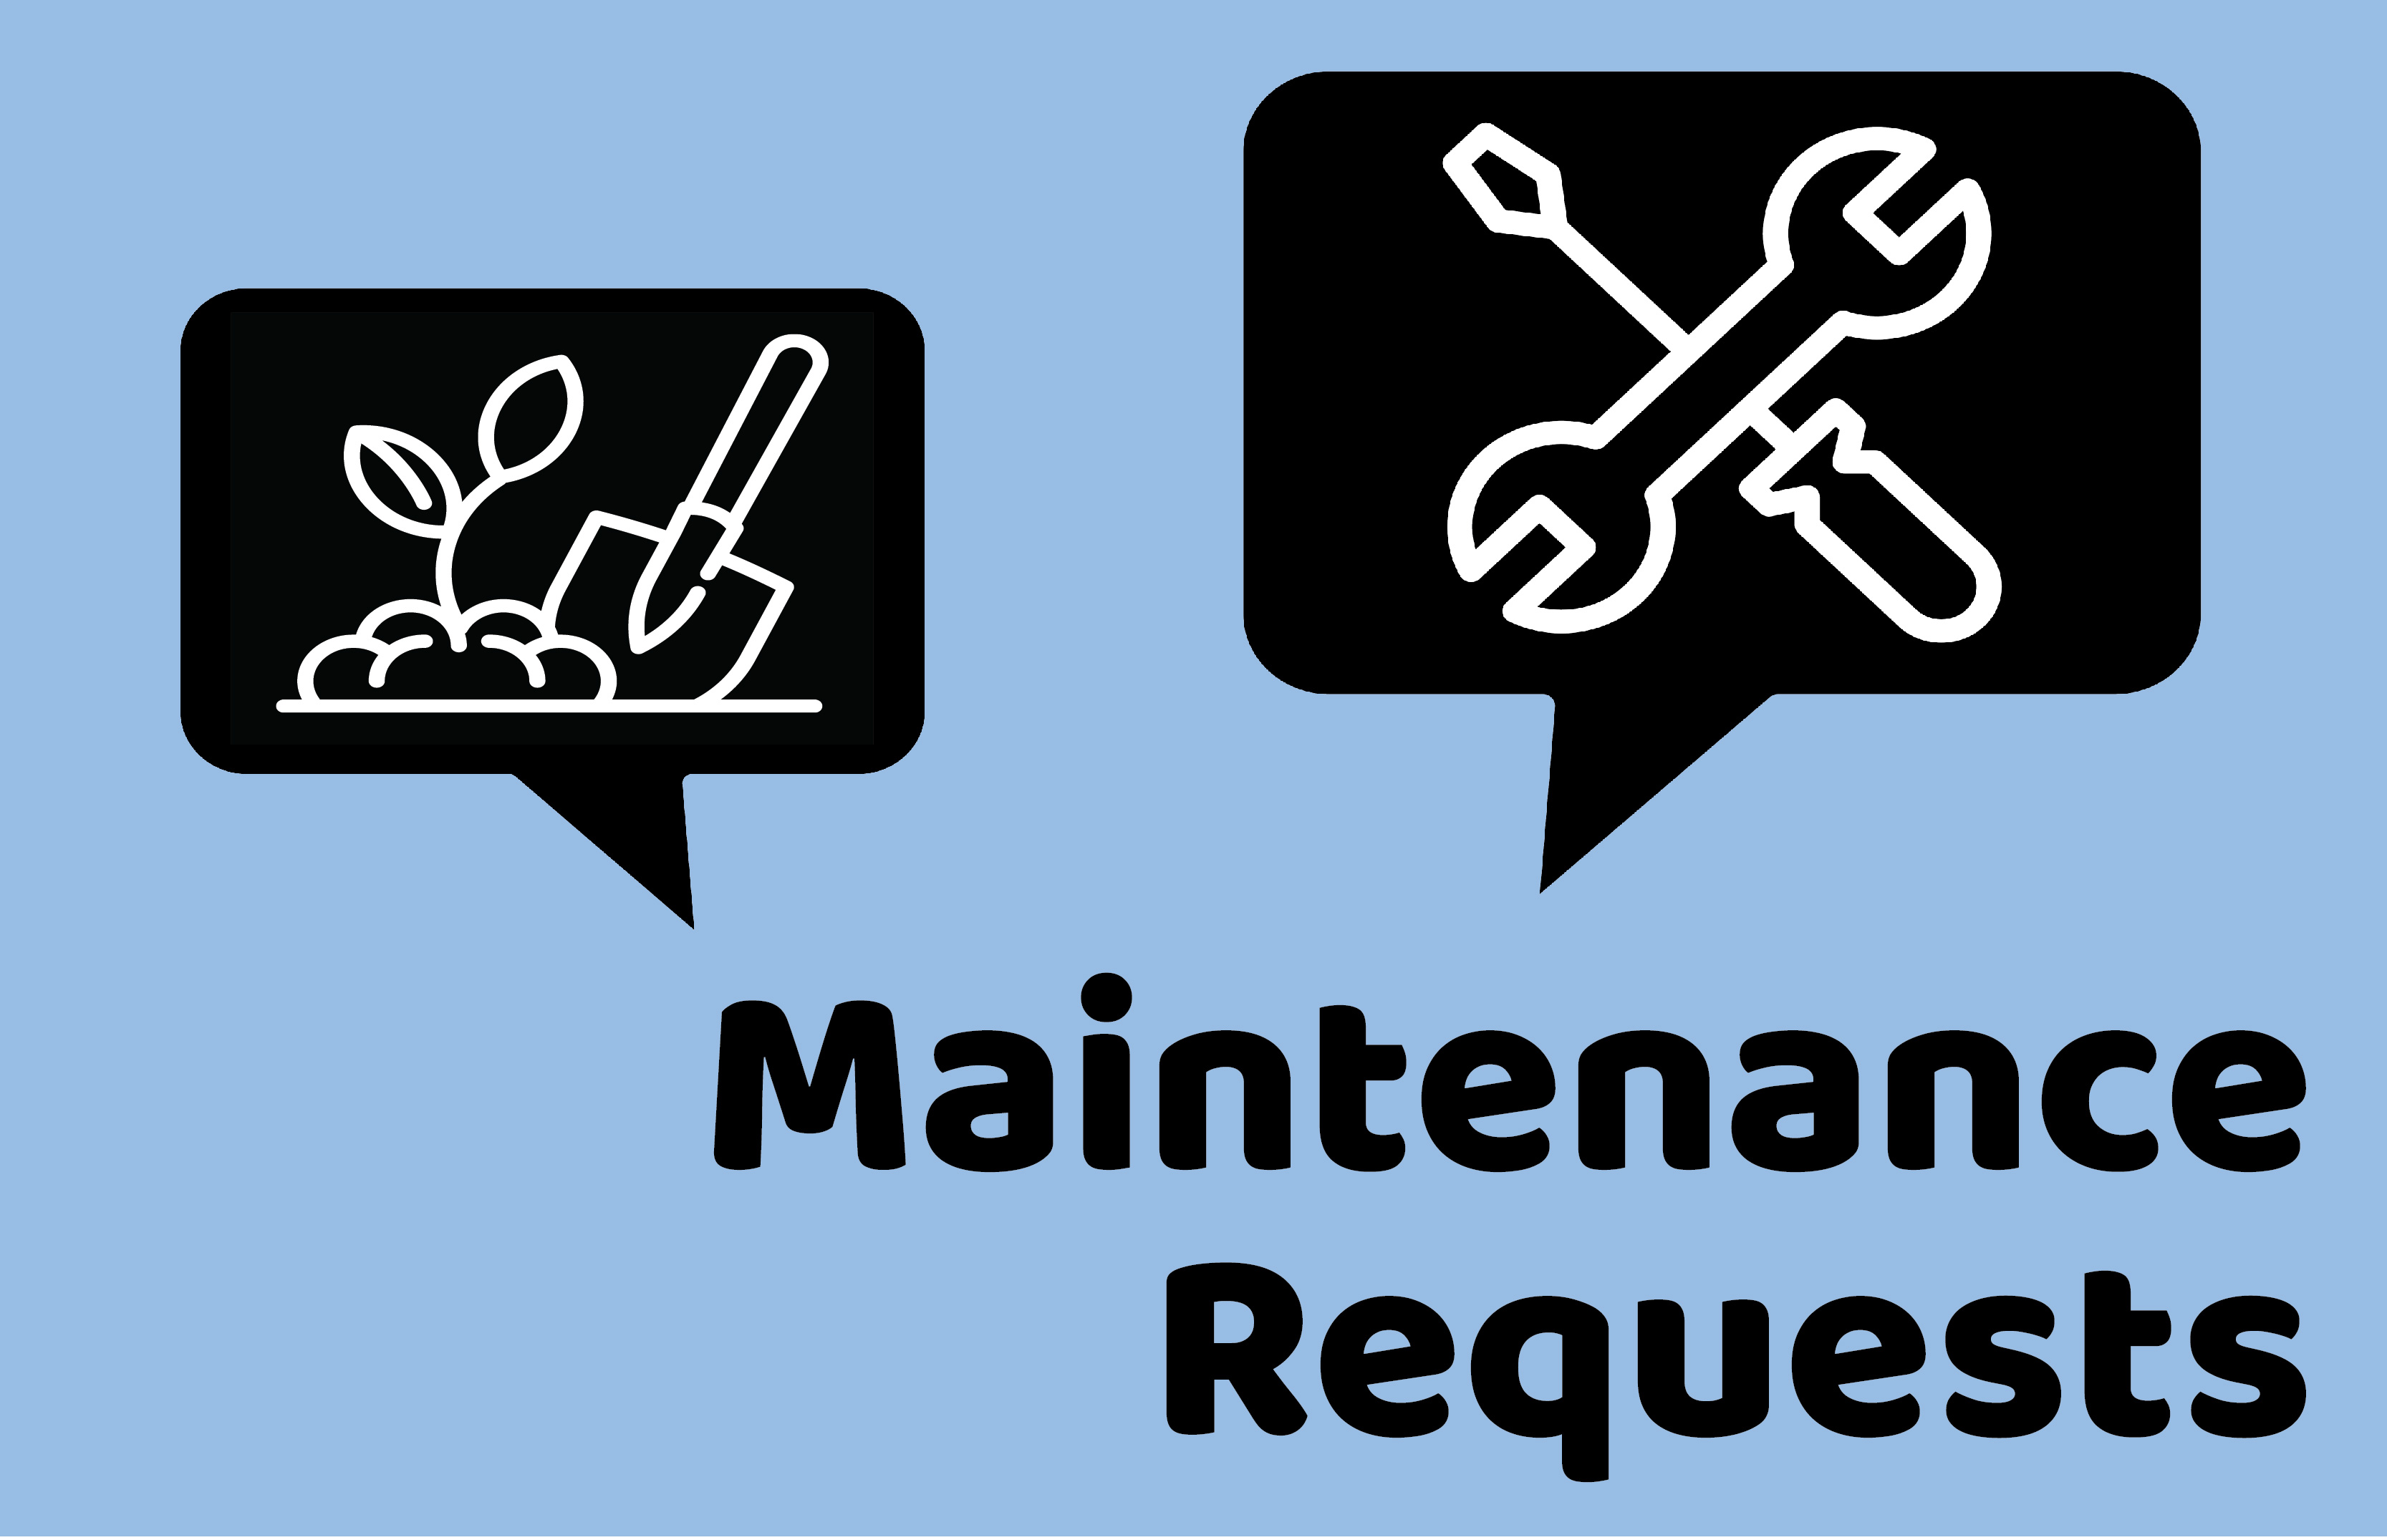 How to Submit a Maintenance Request